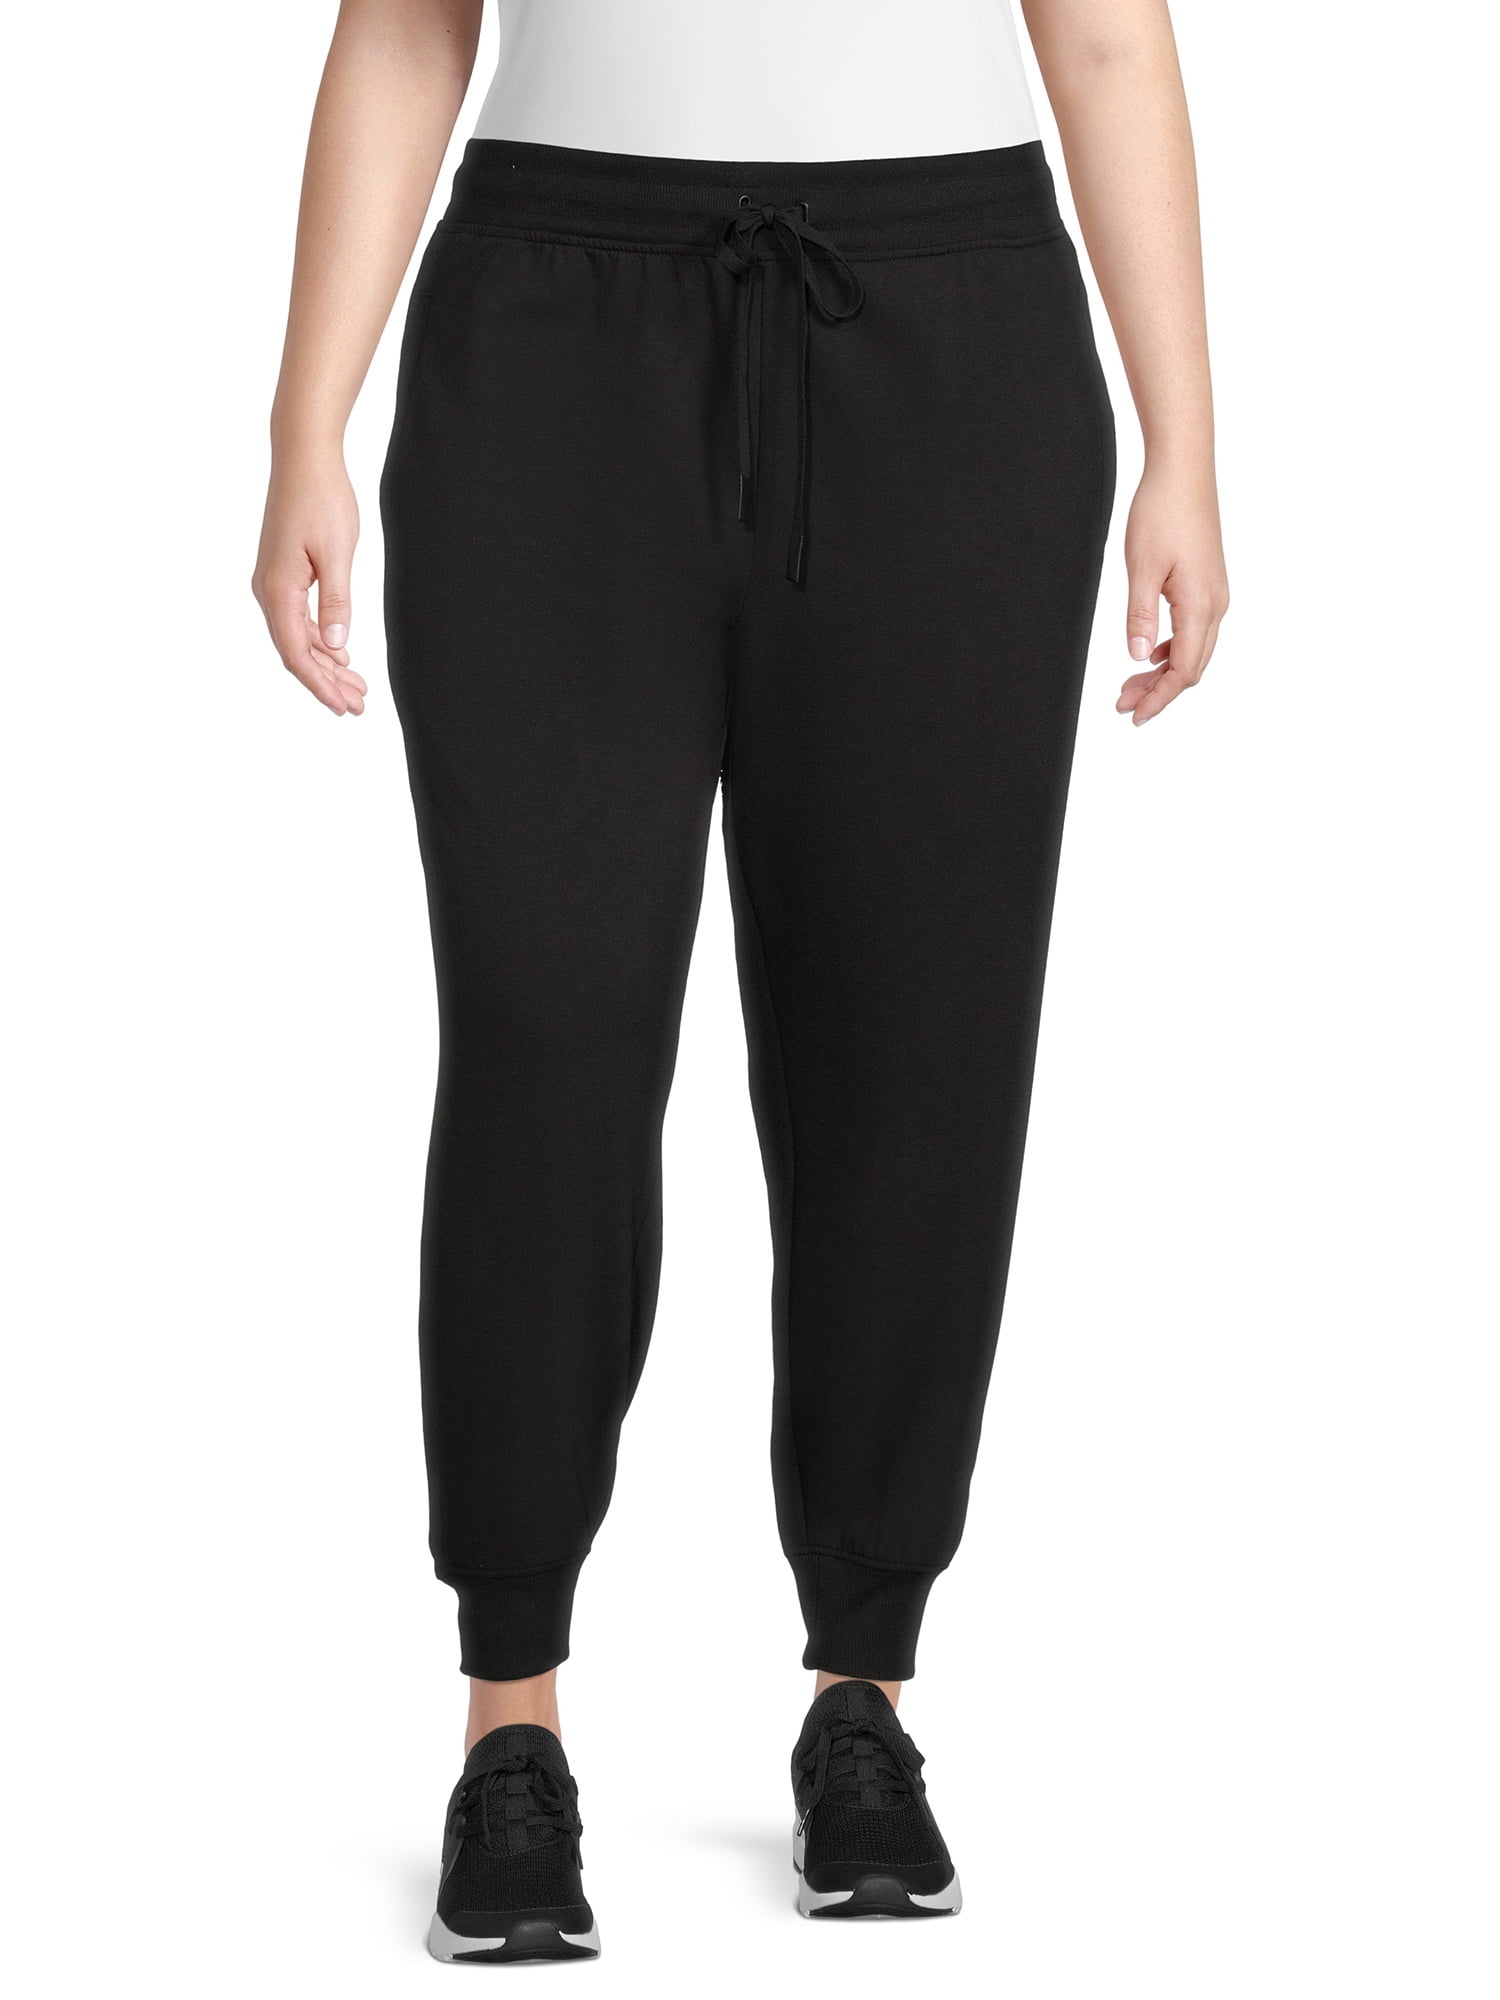 Athletic Works Women's Plus Size Pull-On Jogger Pants